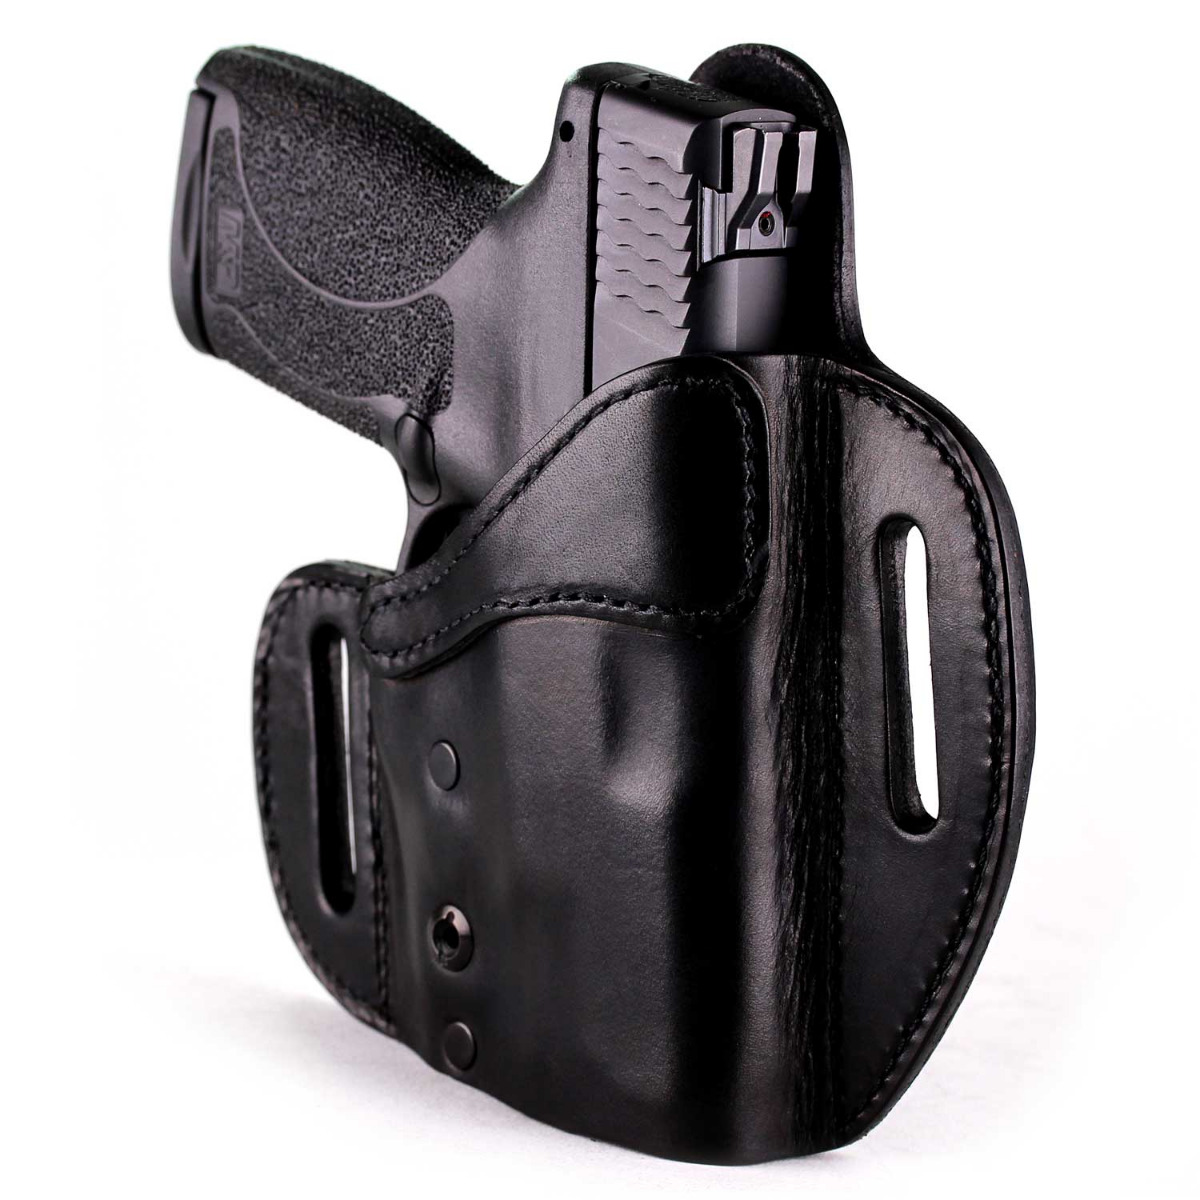 IWB Gun holster For Walther P22 3.4" Barrel 